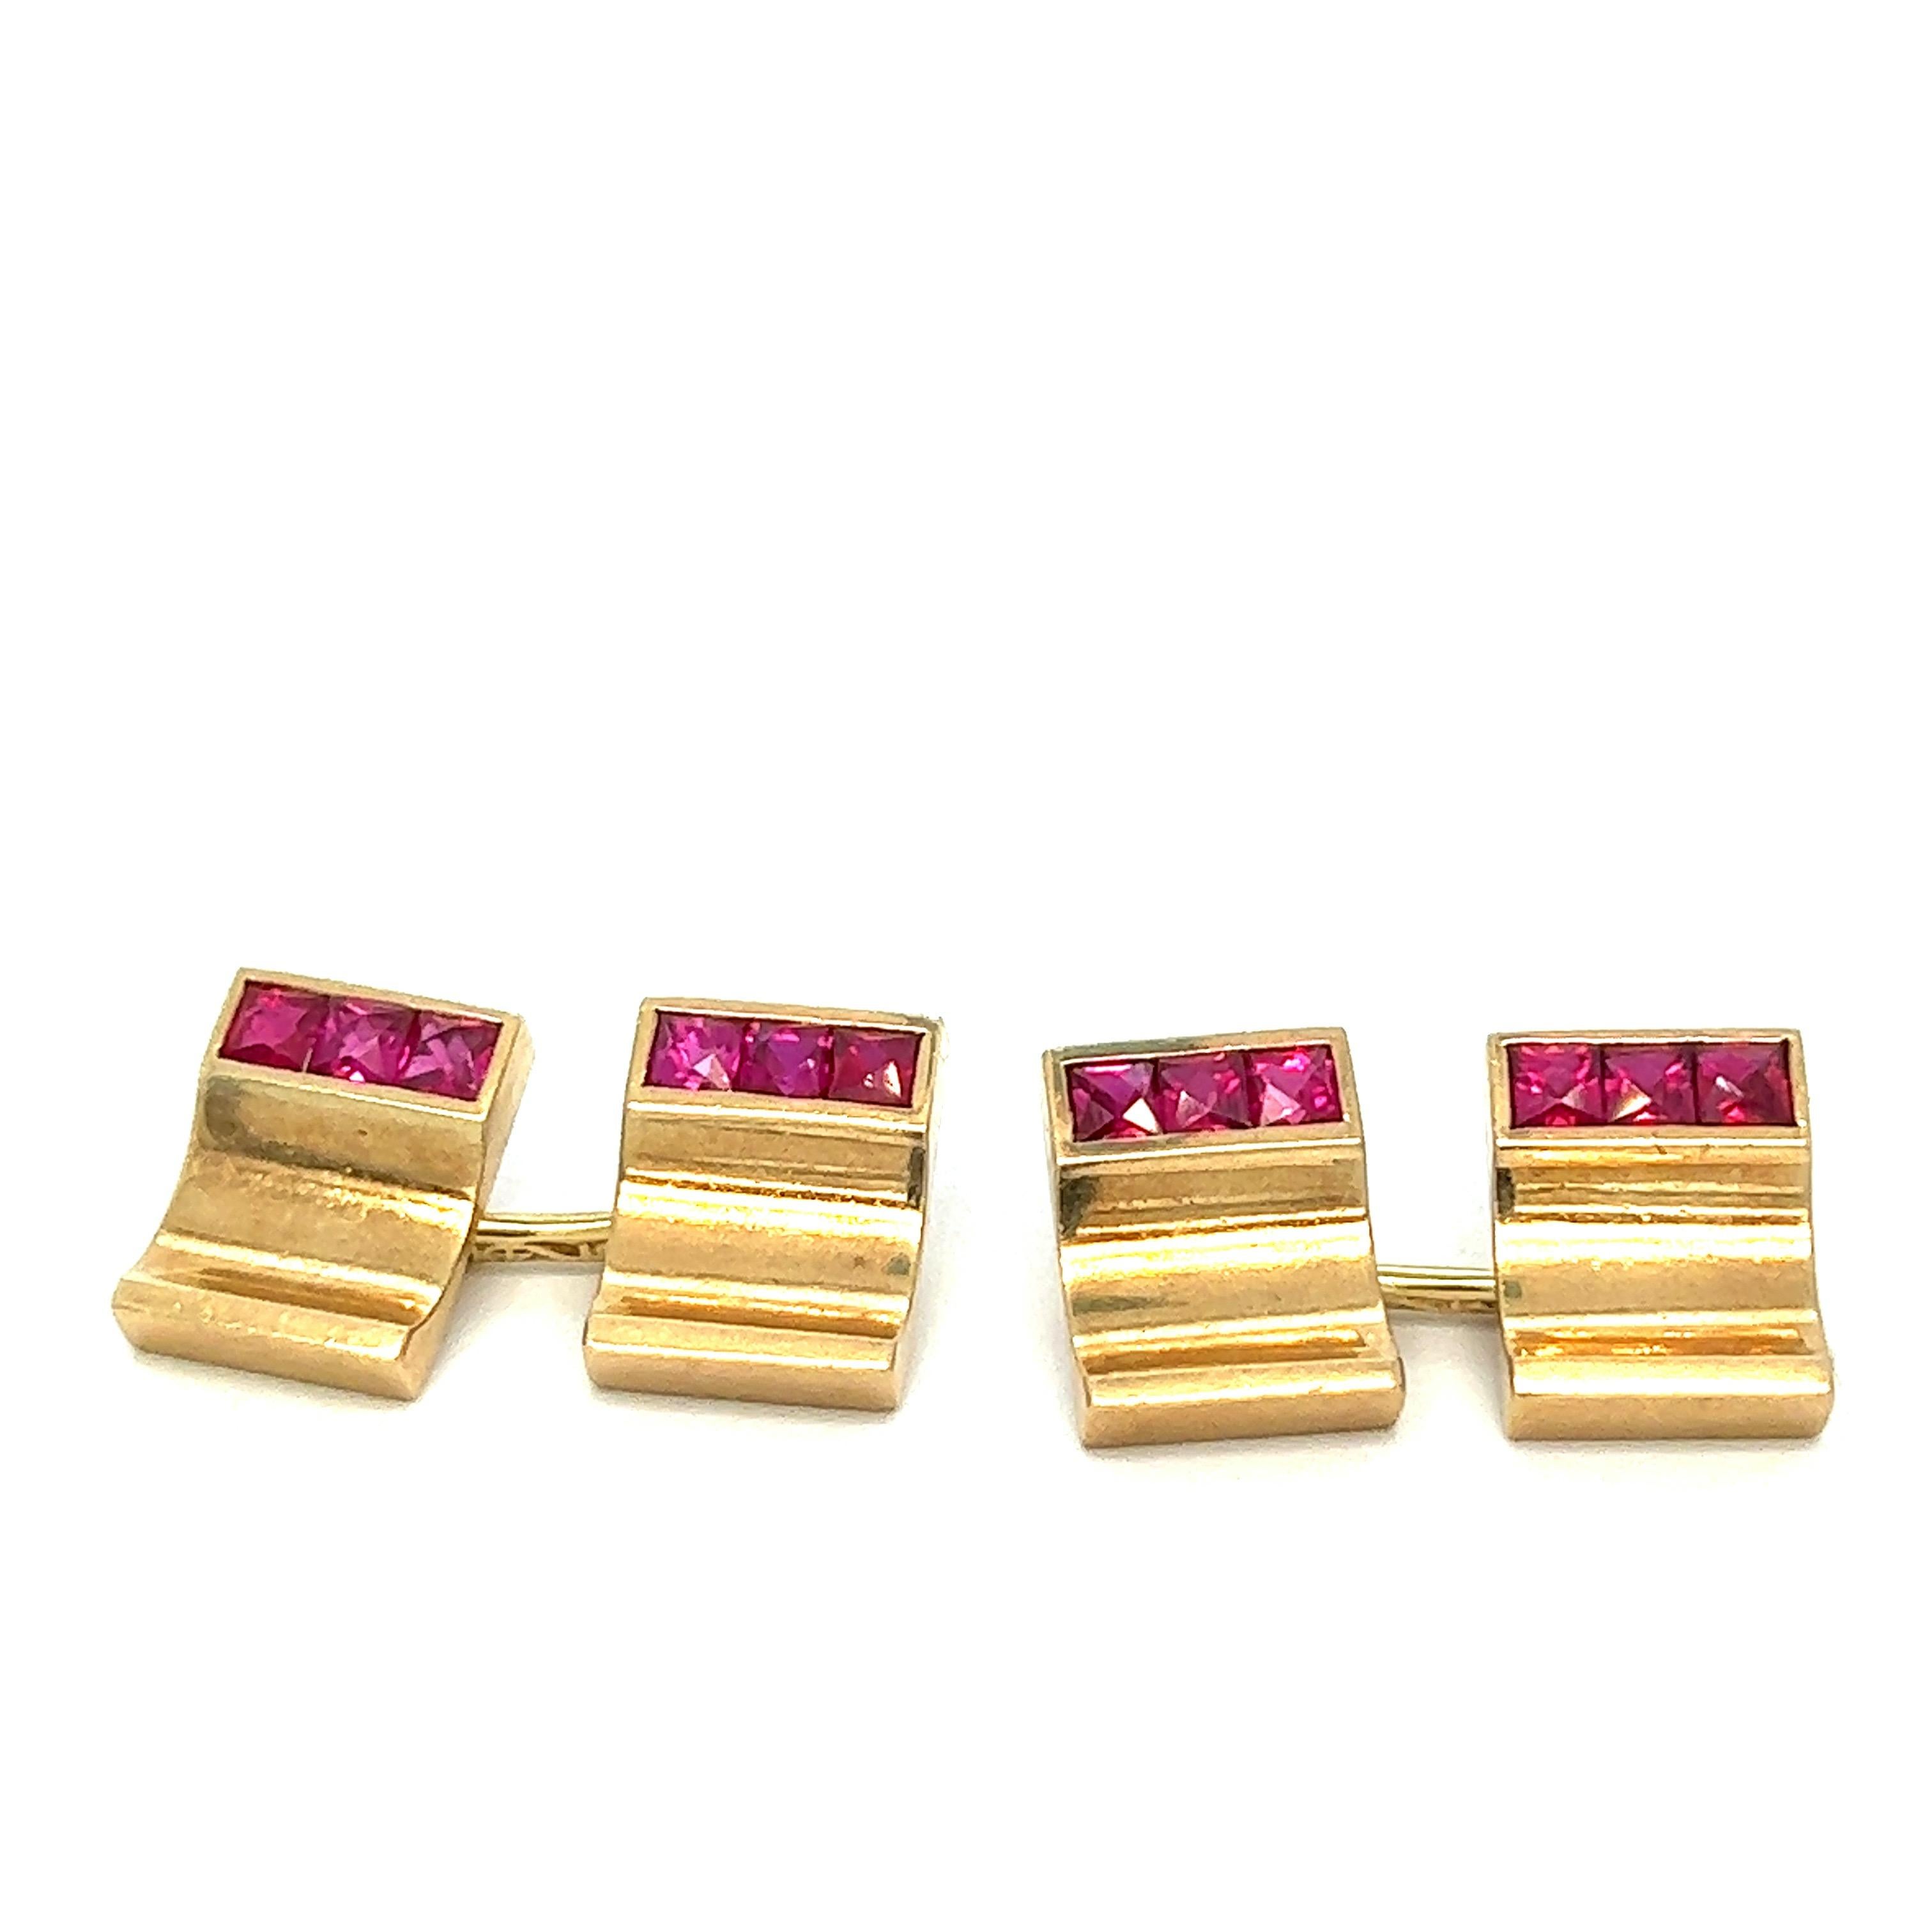 Art deco ruby gold cufflinks 

Beautiful and lively ruby stones set on 14 karat yellow gold

Size: width 13 mm, length 10 mm
Total weight: 15.4 grams